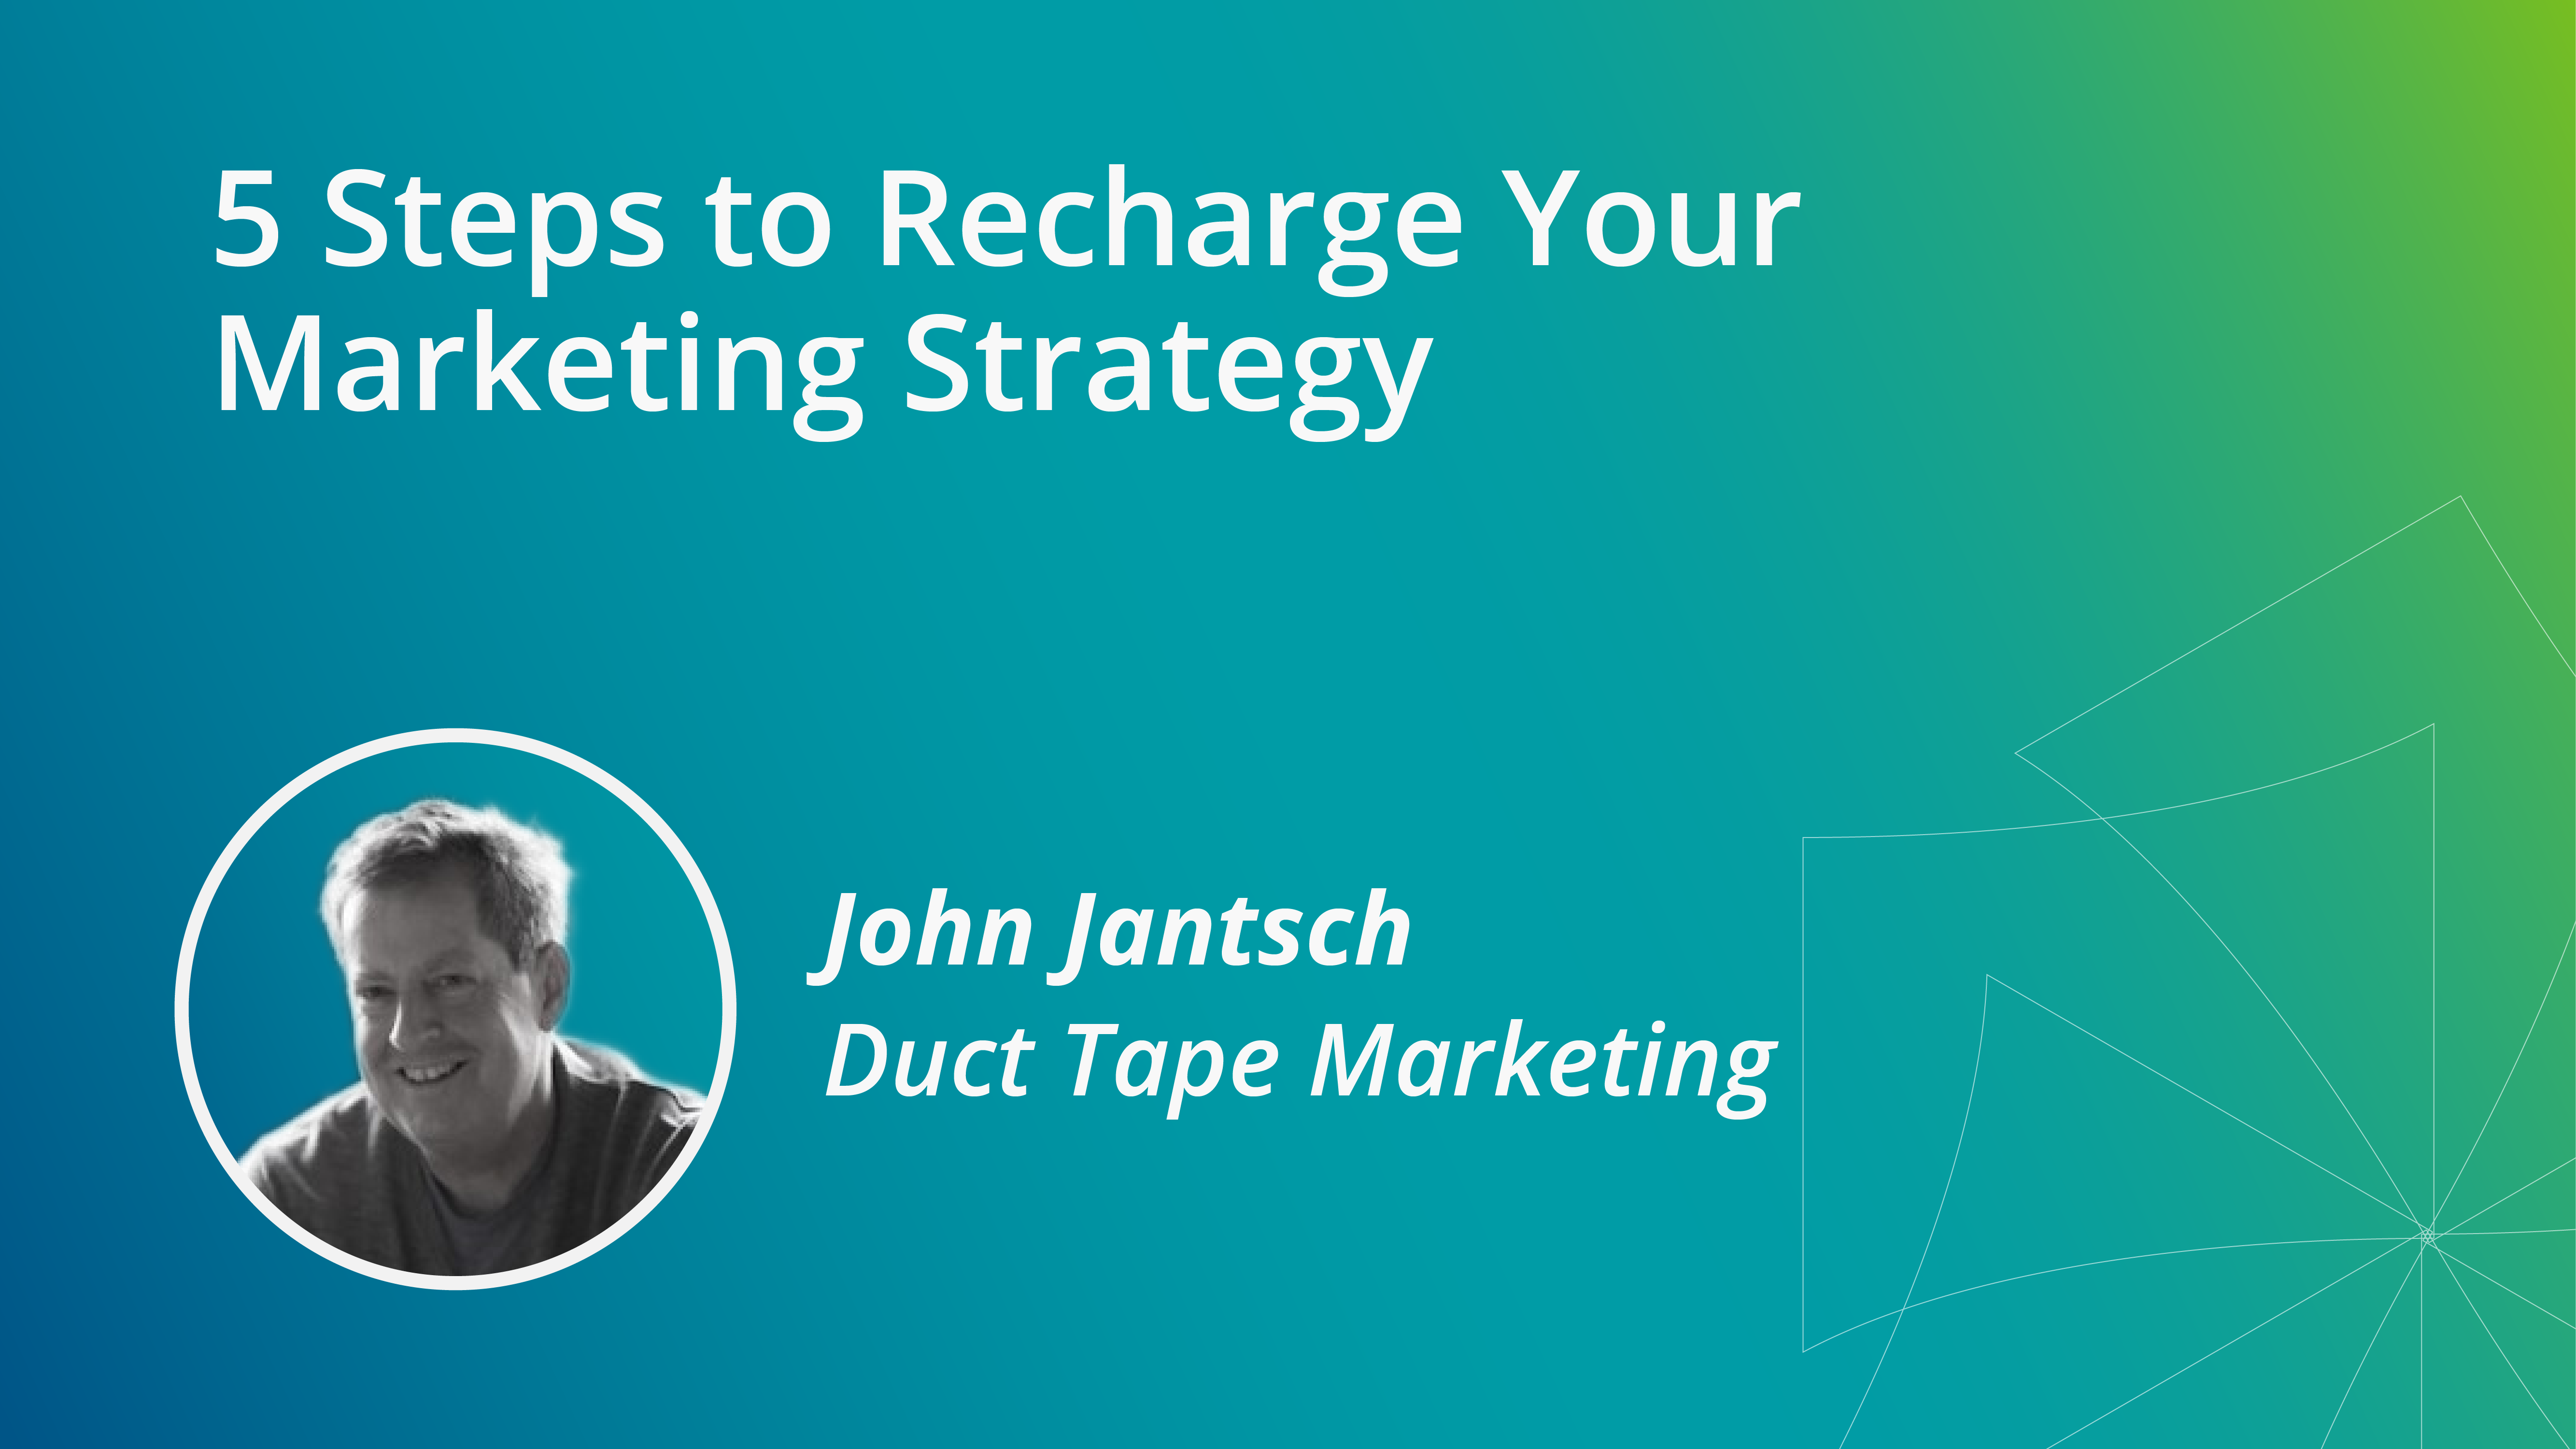 5 Steps to Recharge Your Marketing Strategy